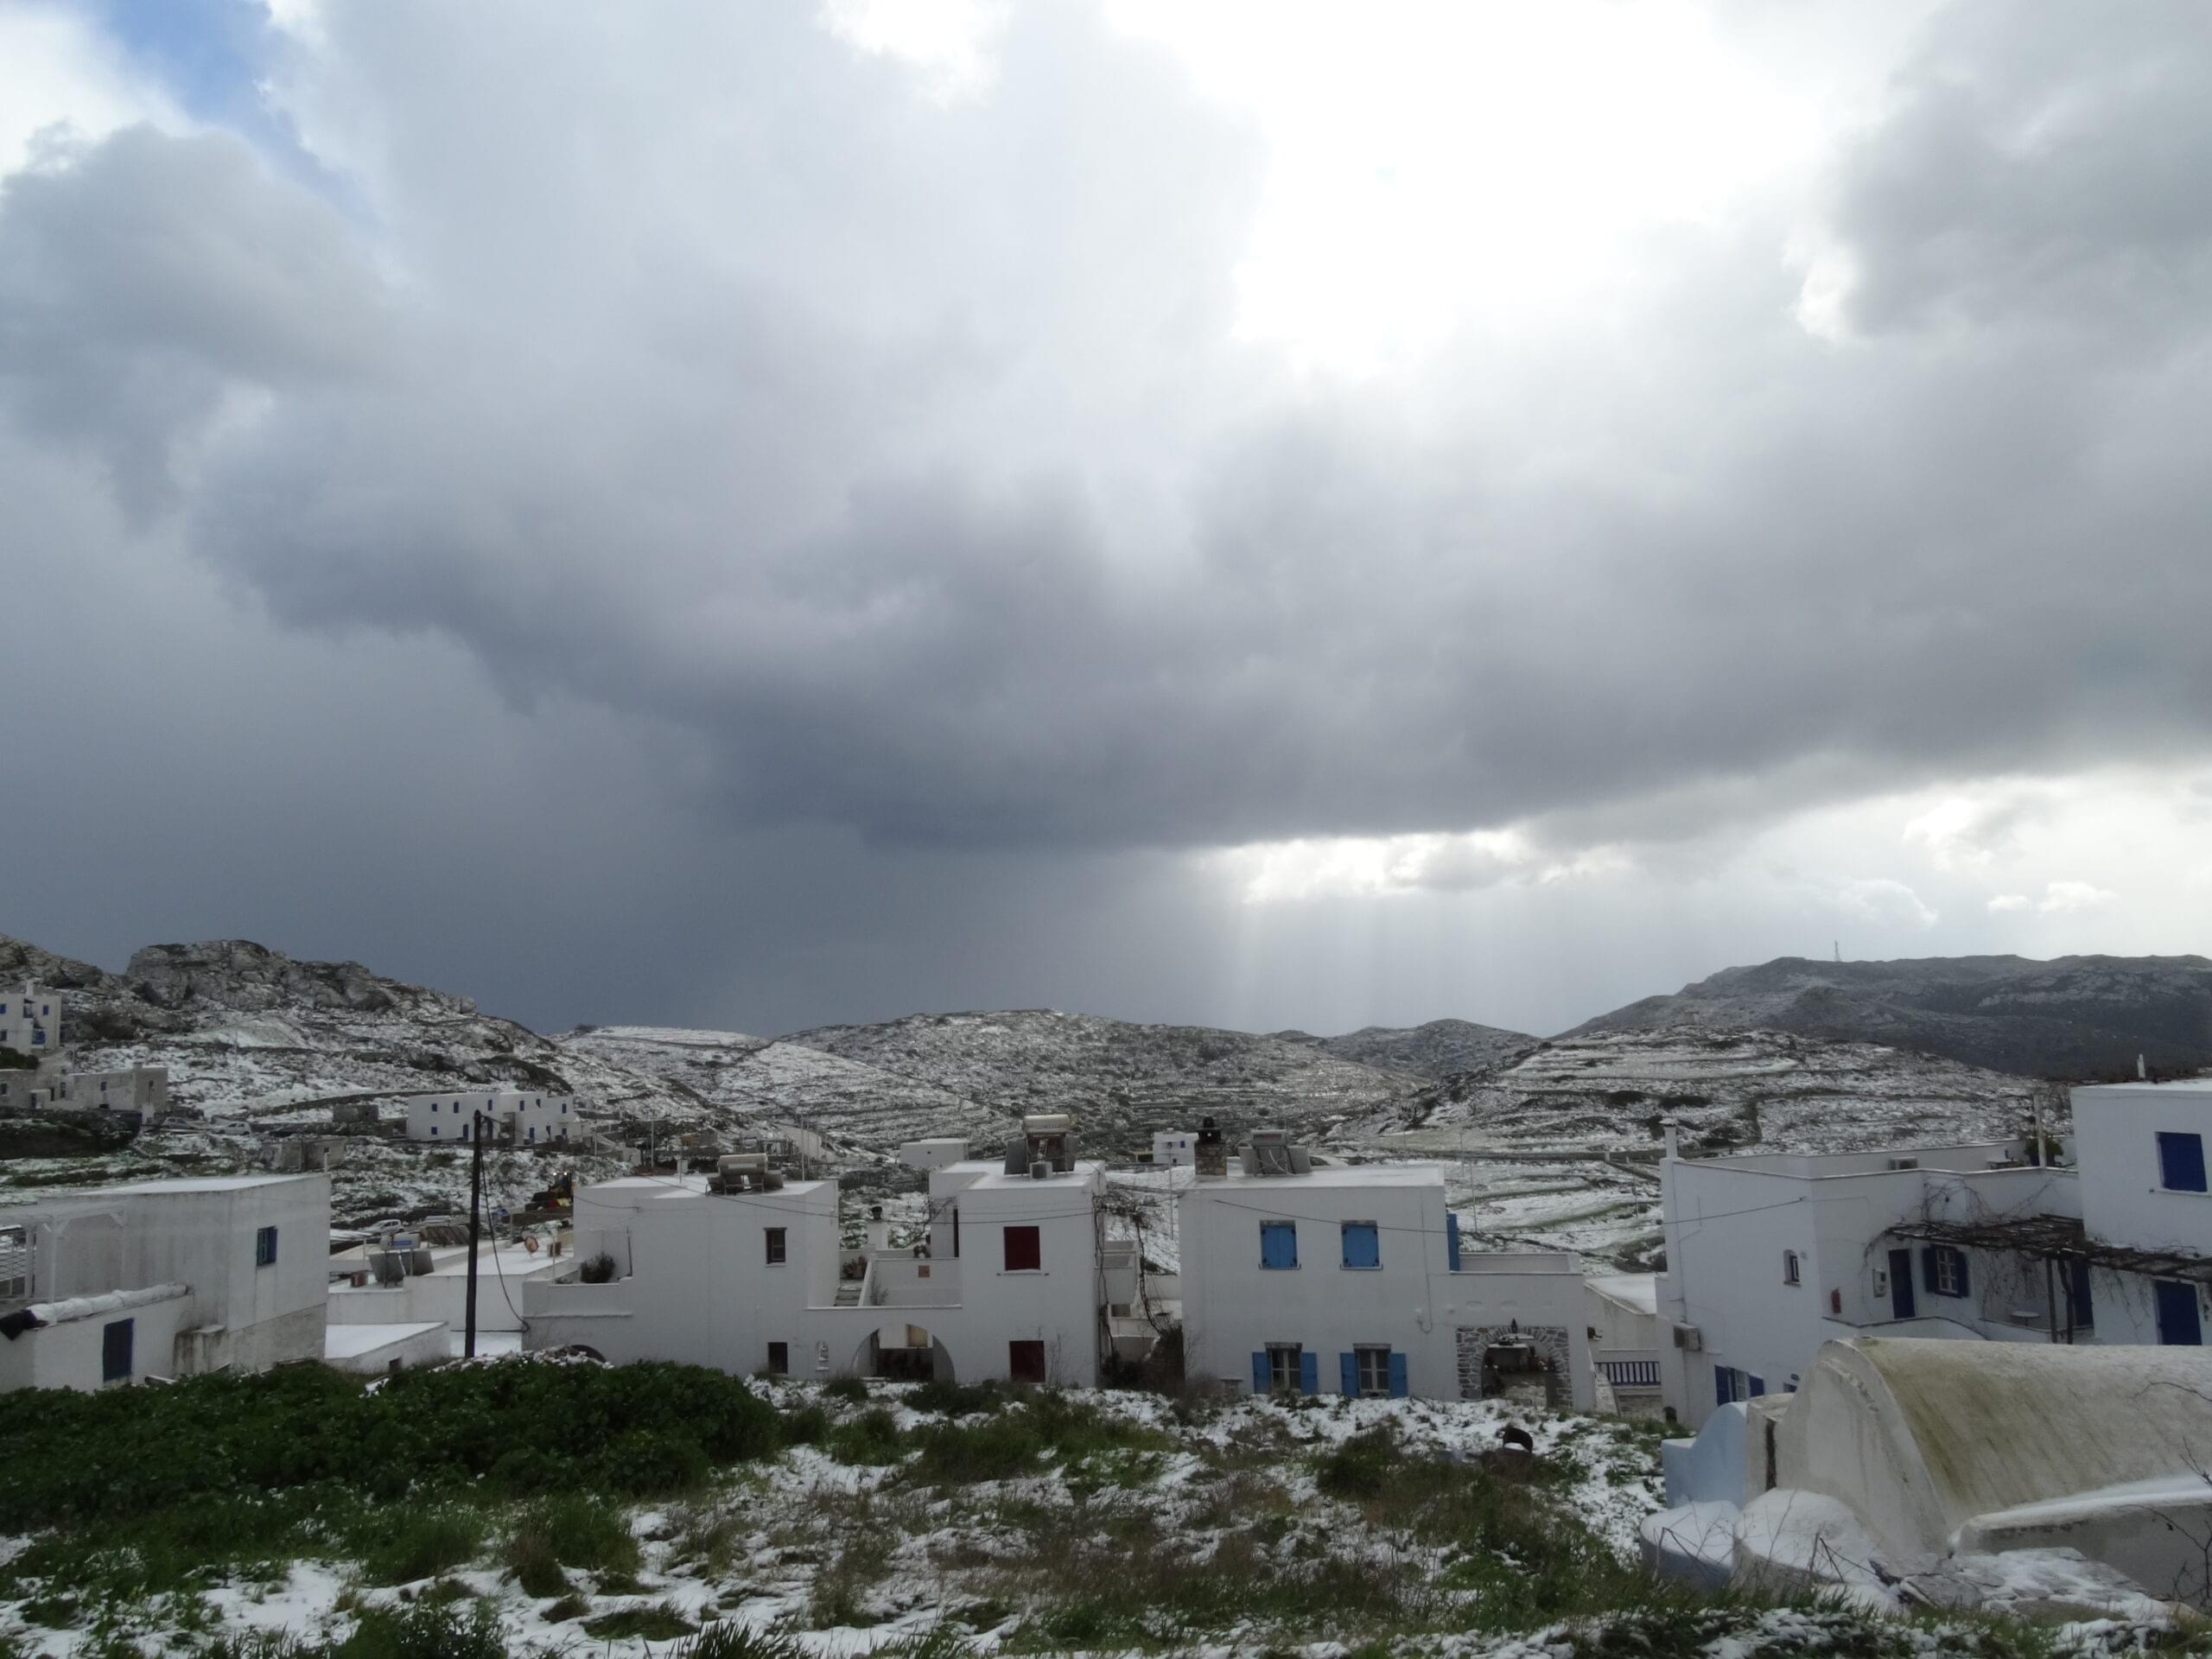 snowing in Chora